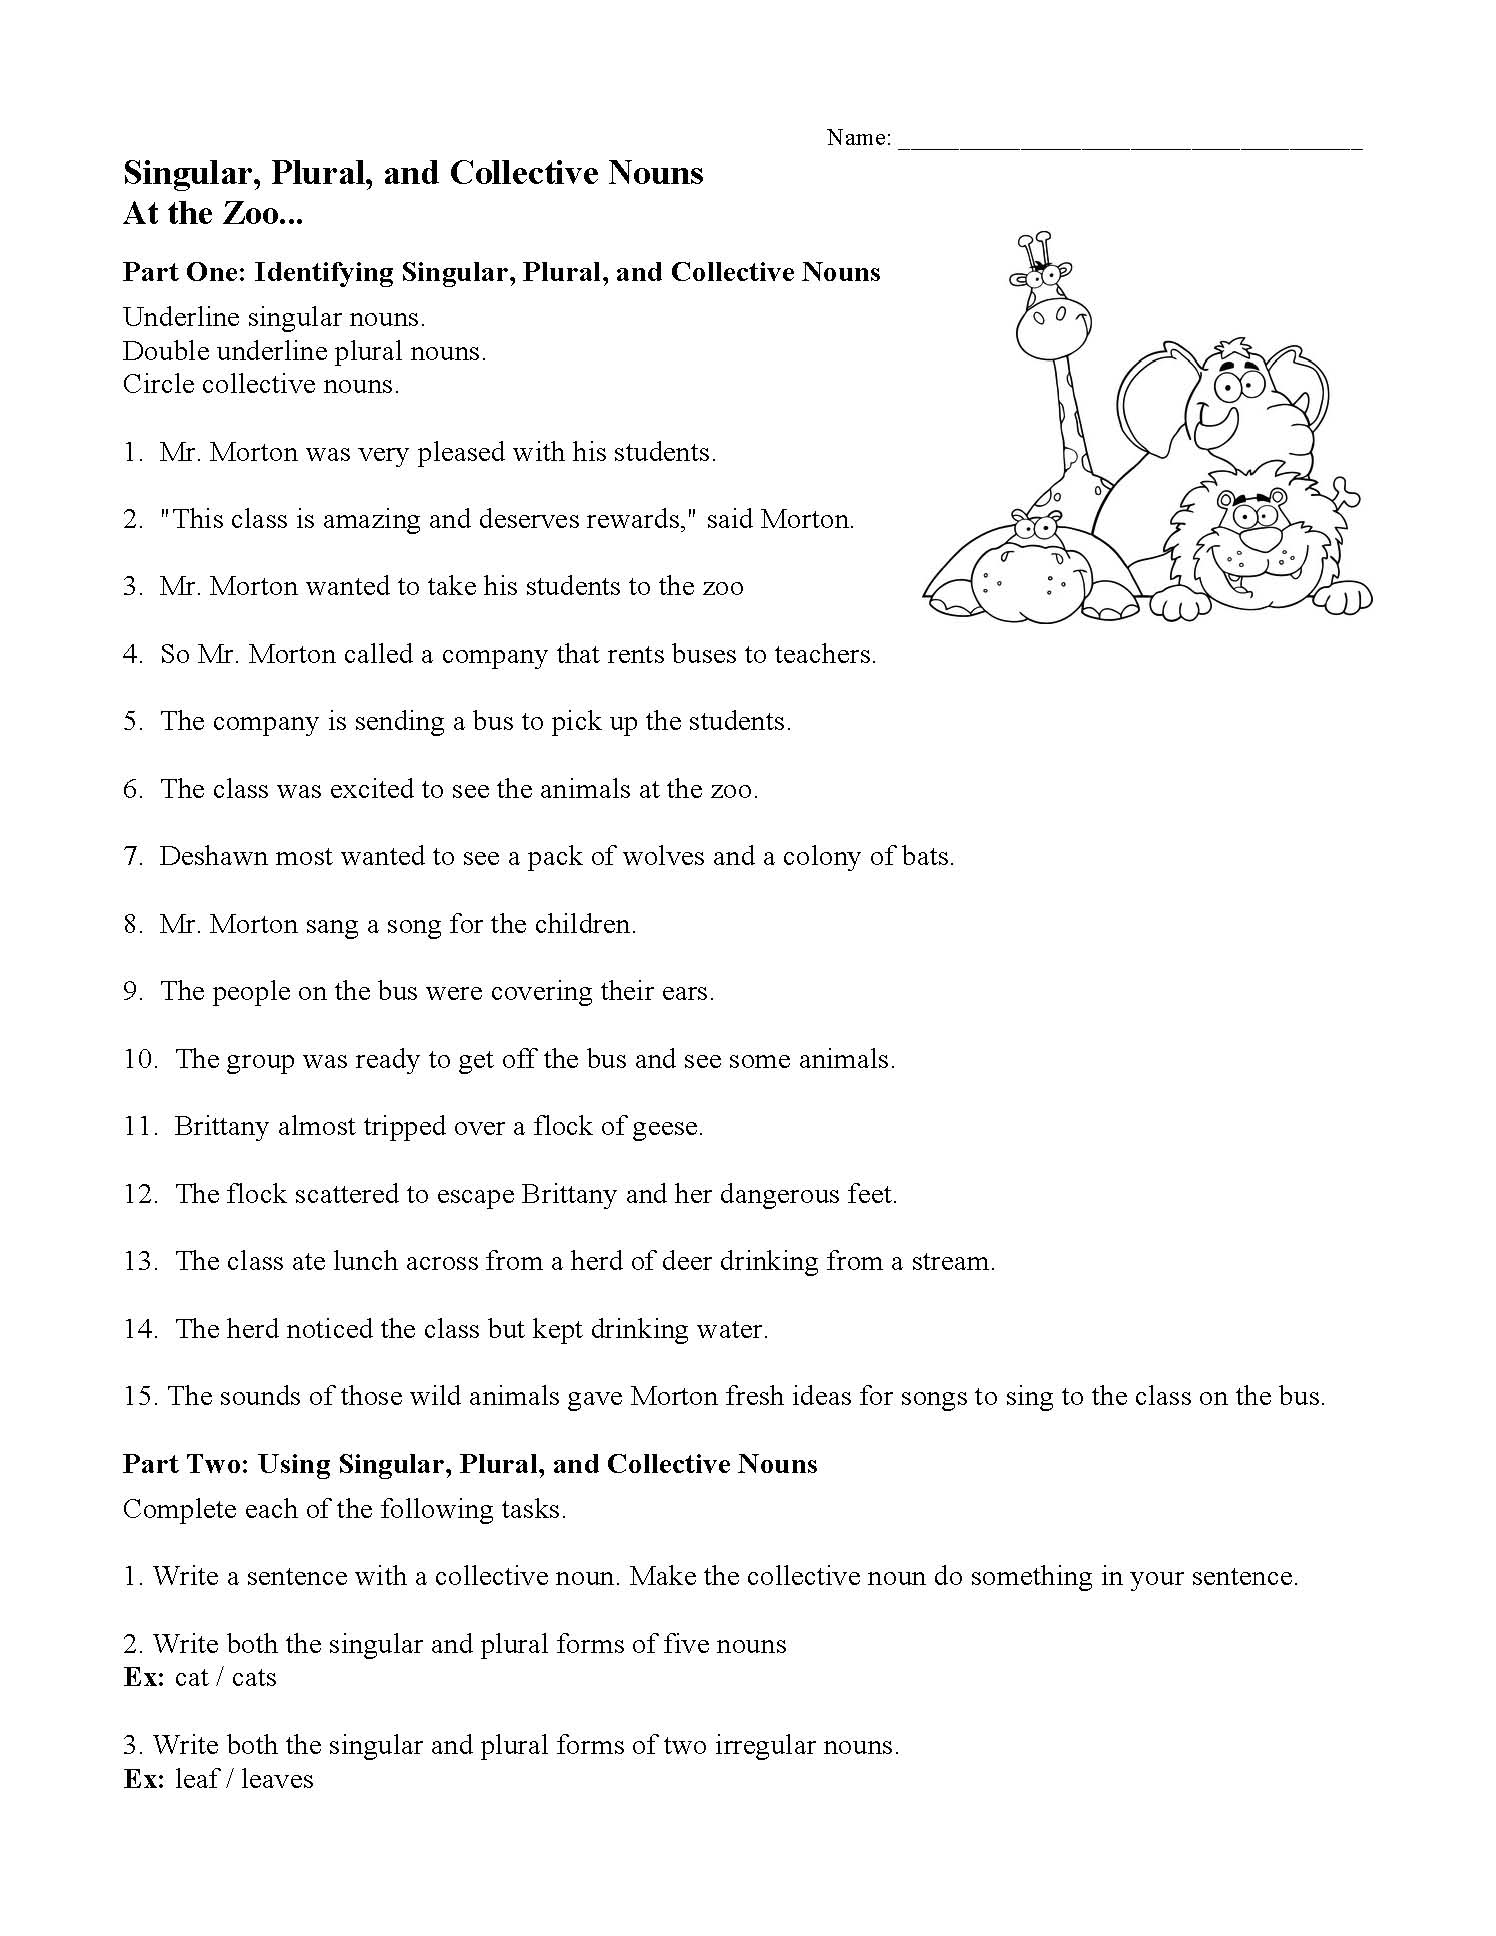 This is a preview image of Singular, Plural, and Collective Nouns Worksheet | "At the Zoo...". Click on it to enlarge it or view the source file.